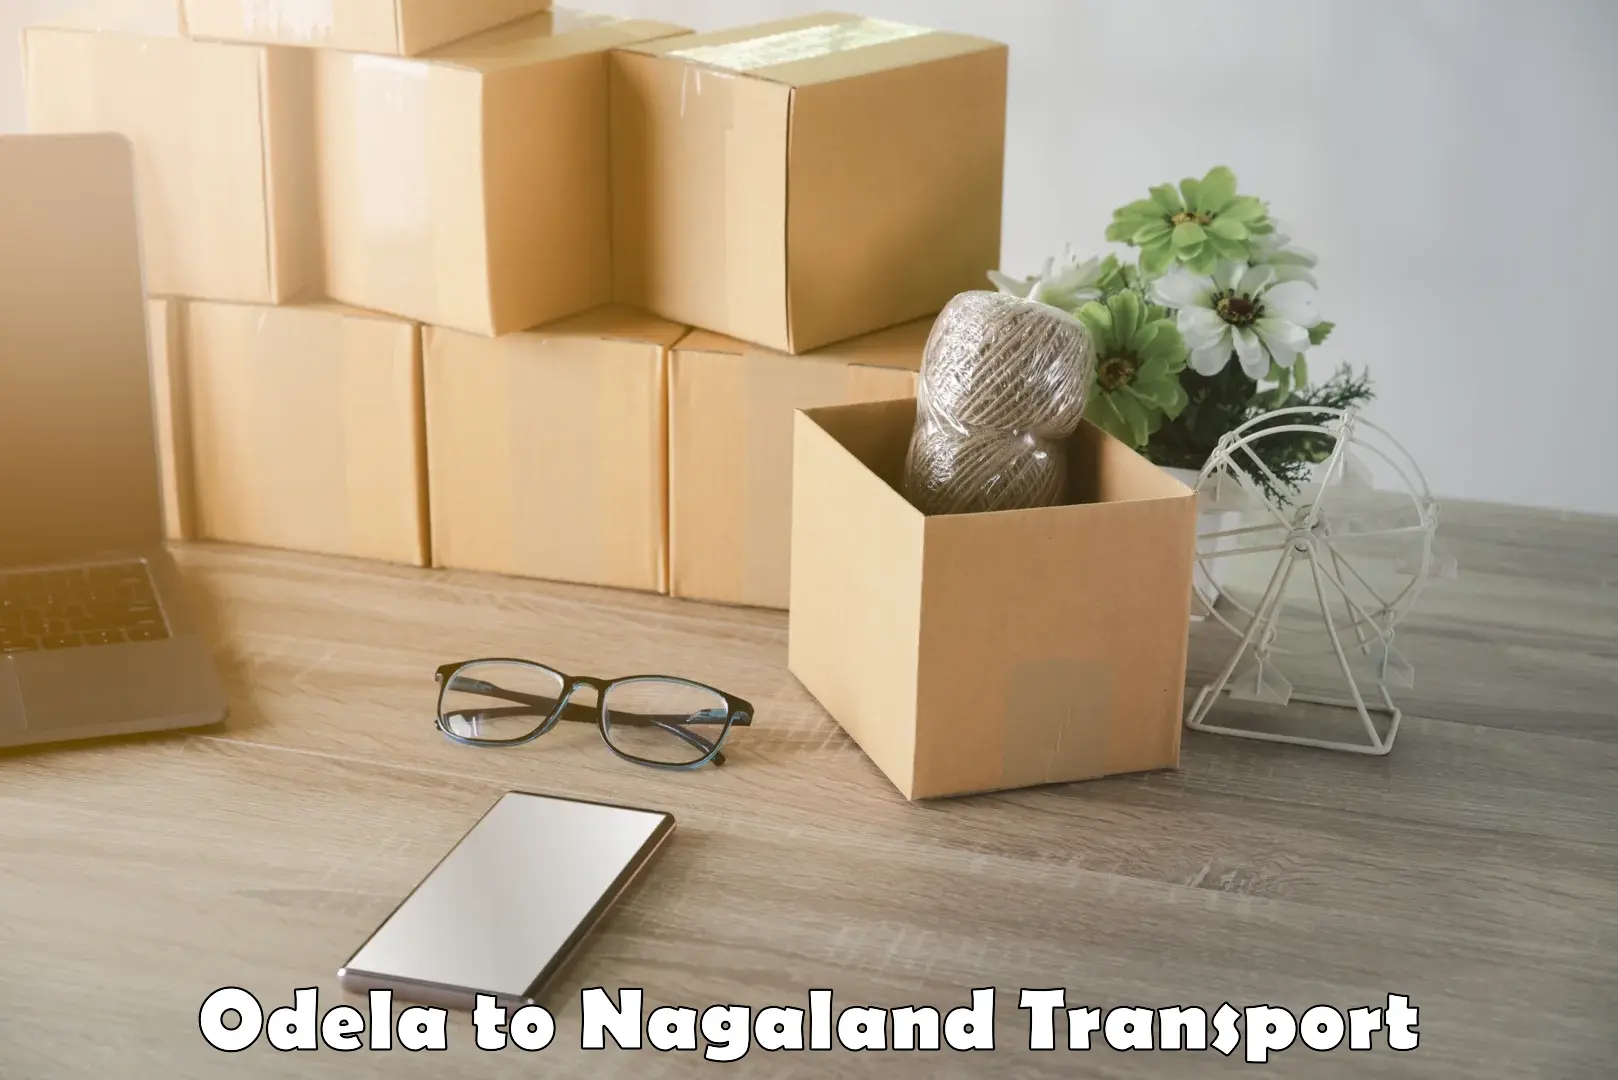 Truck transport companies in India Odela to Nagaland